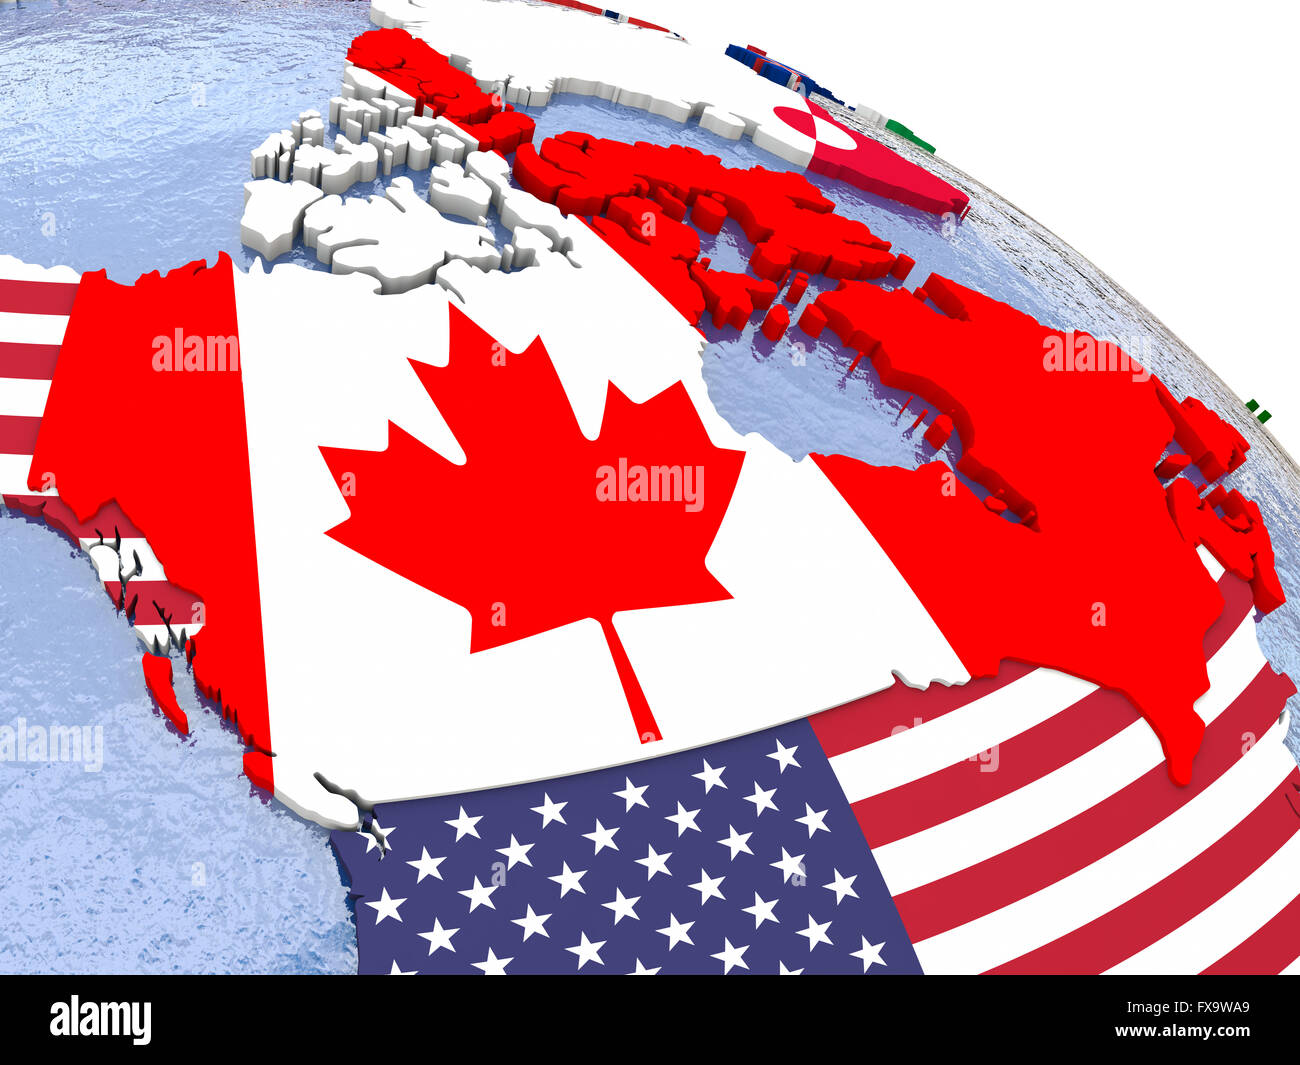 Canada - political map of Canada and surrounding region with each country represented by its national flag. Stock Photo